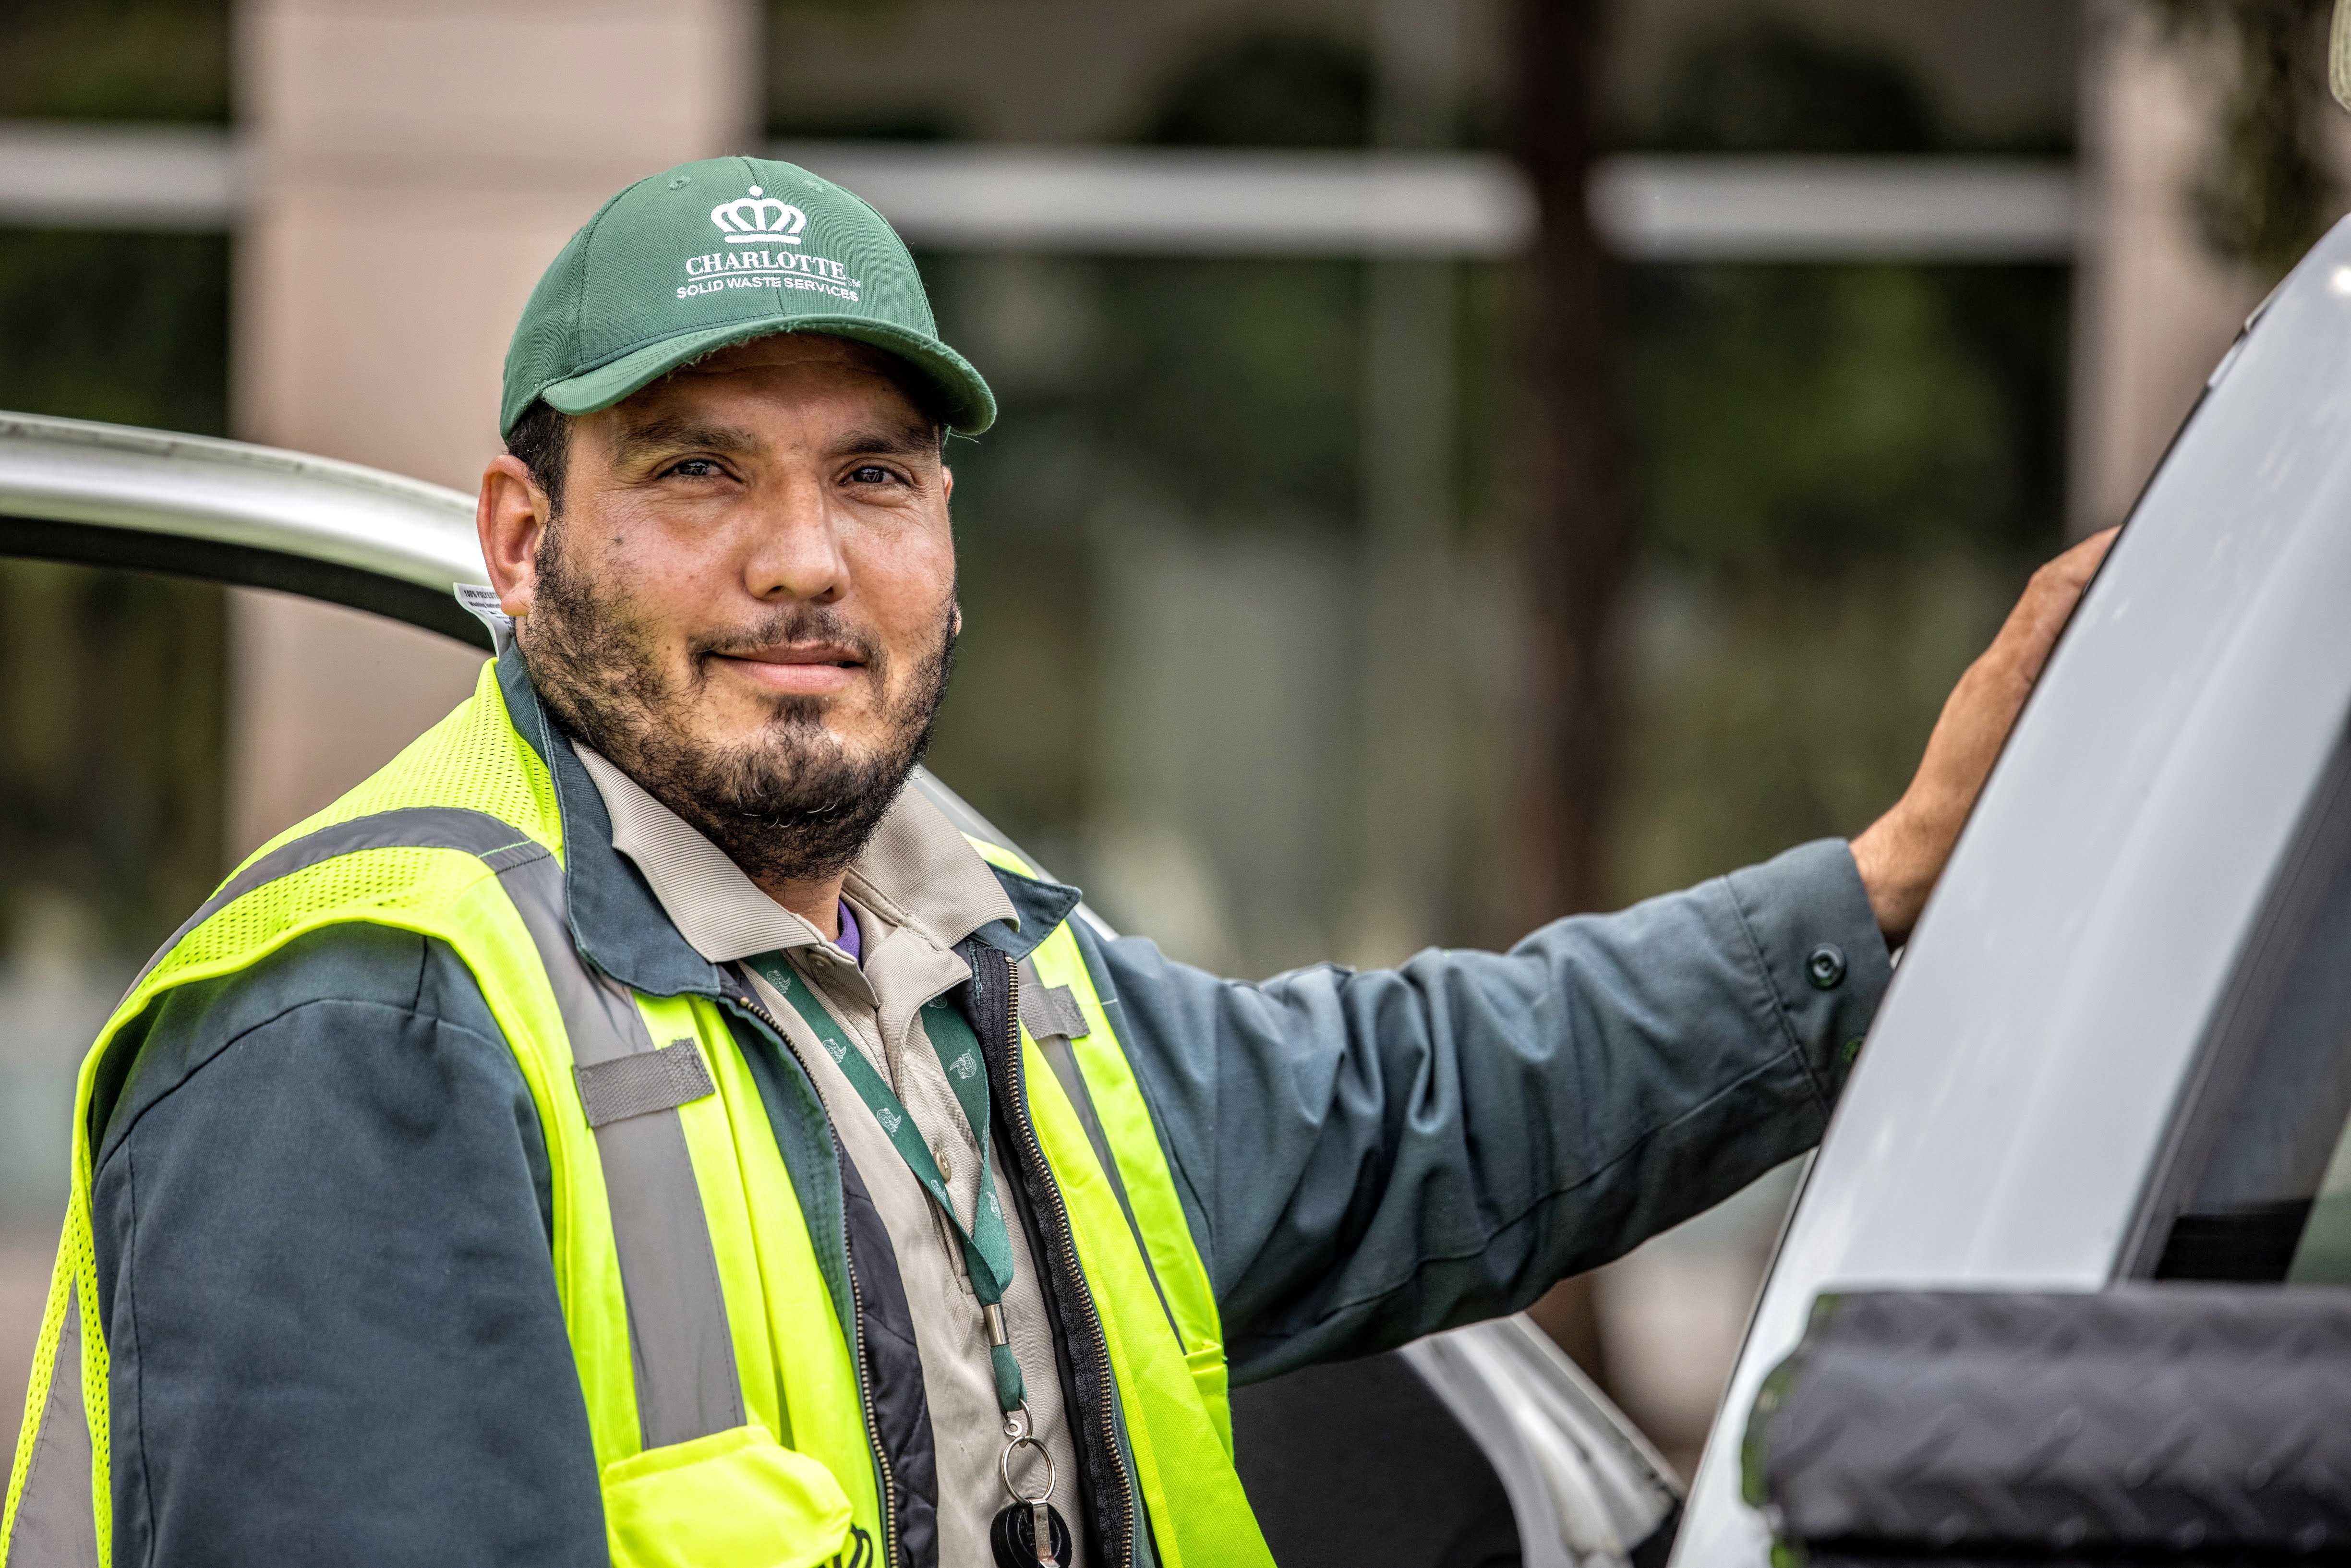 Solid Waste Services employee smiling at camera